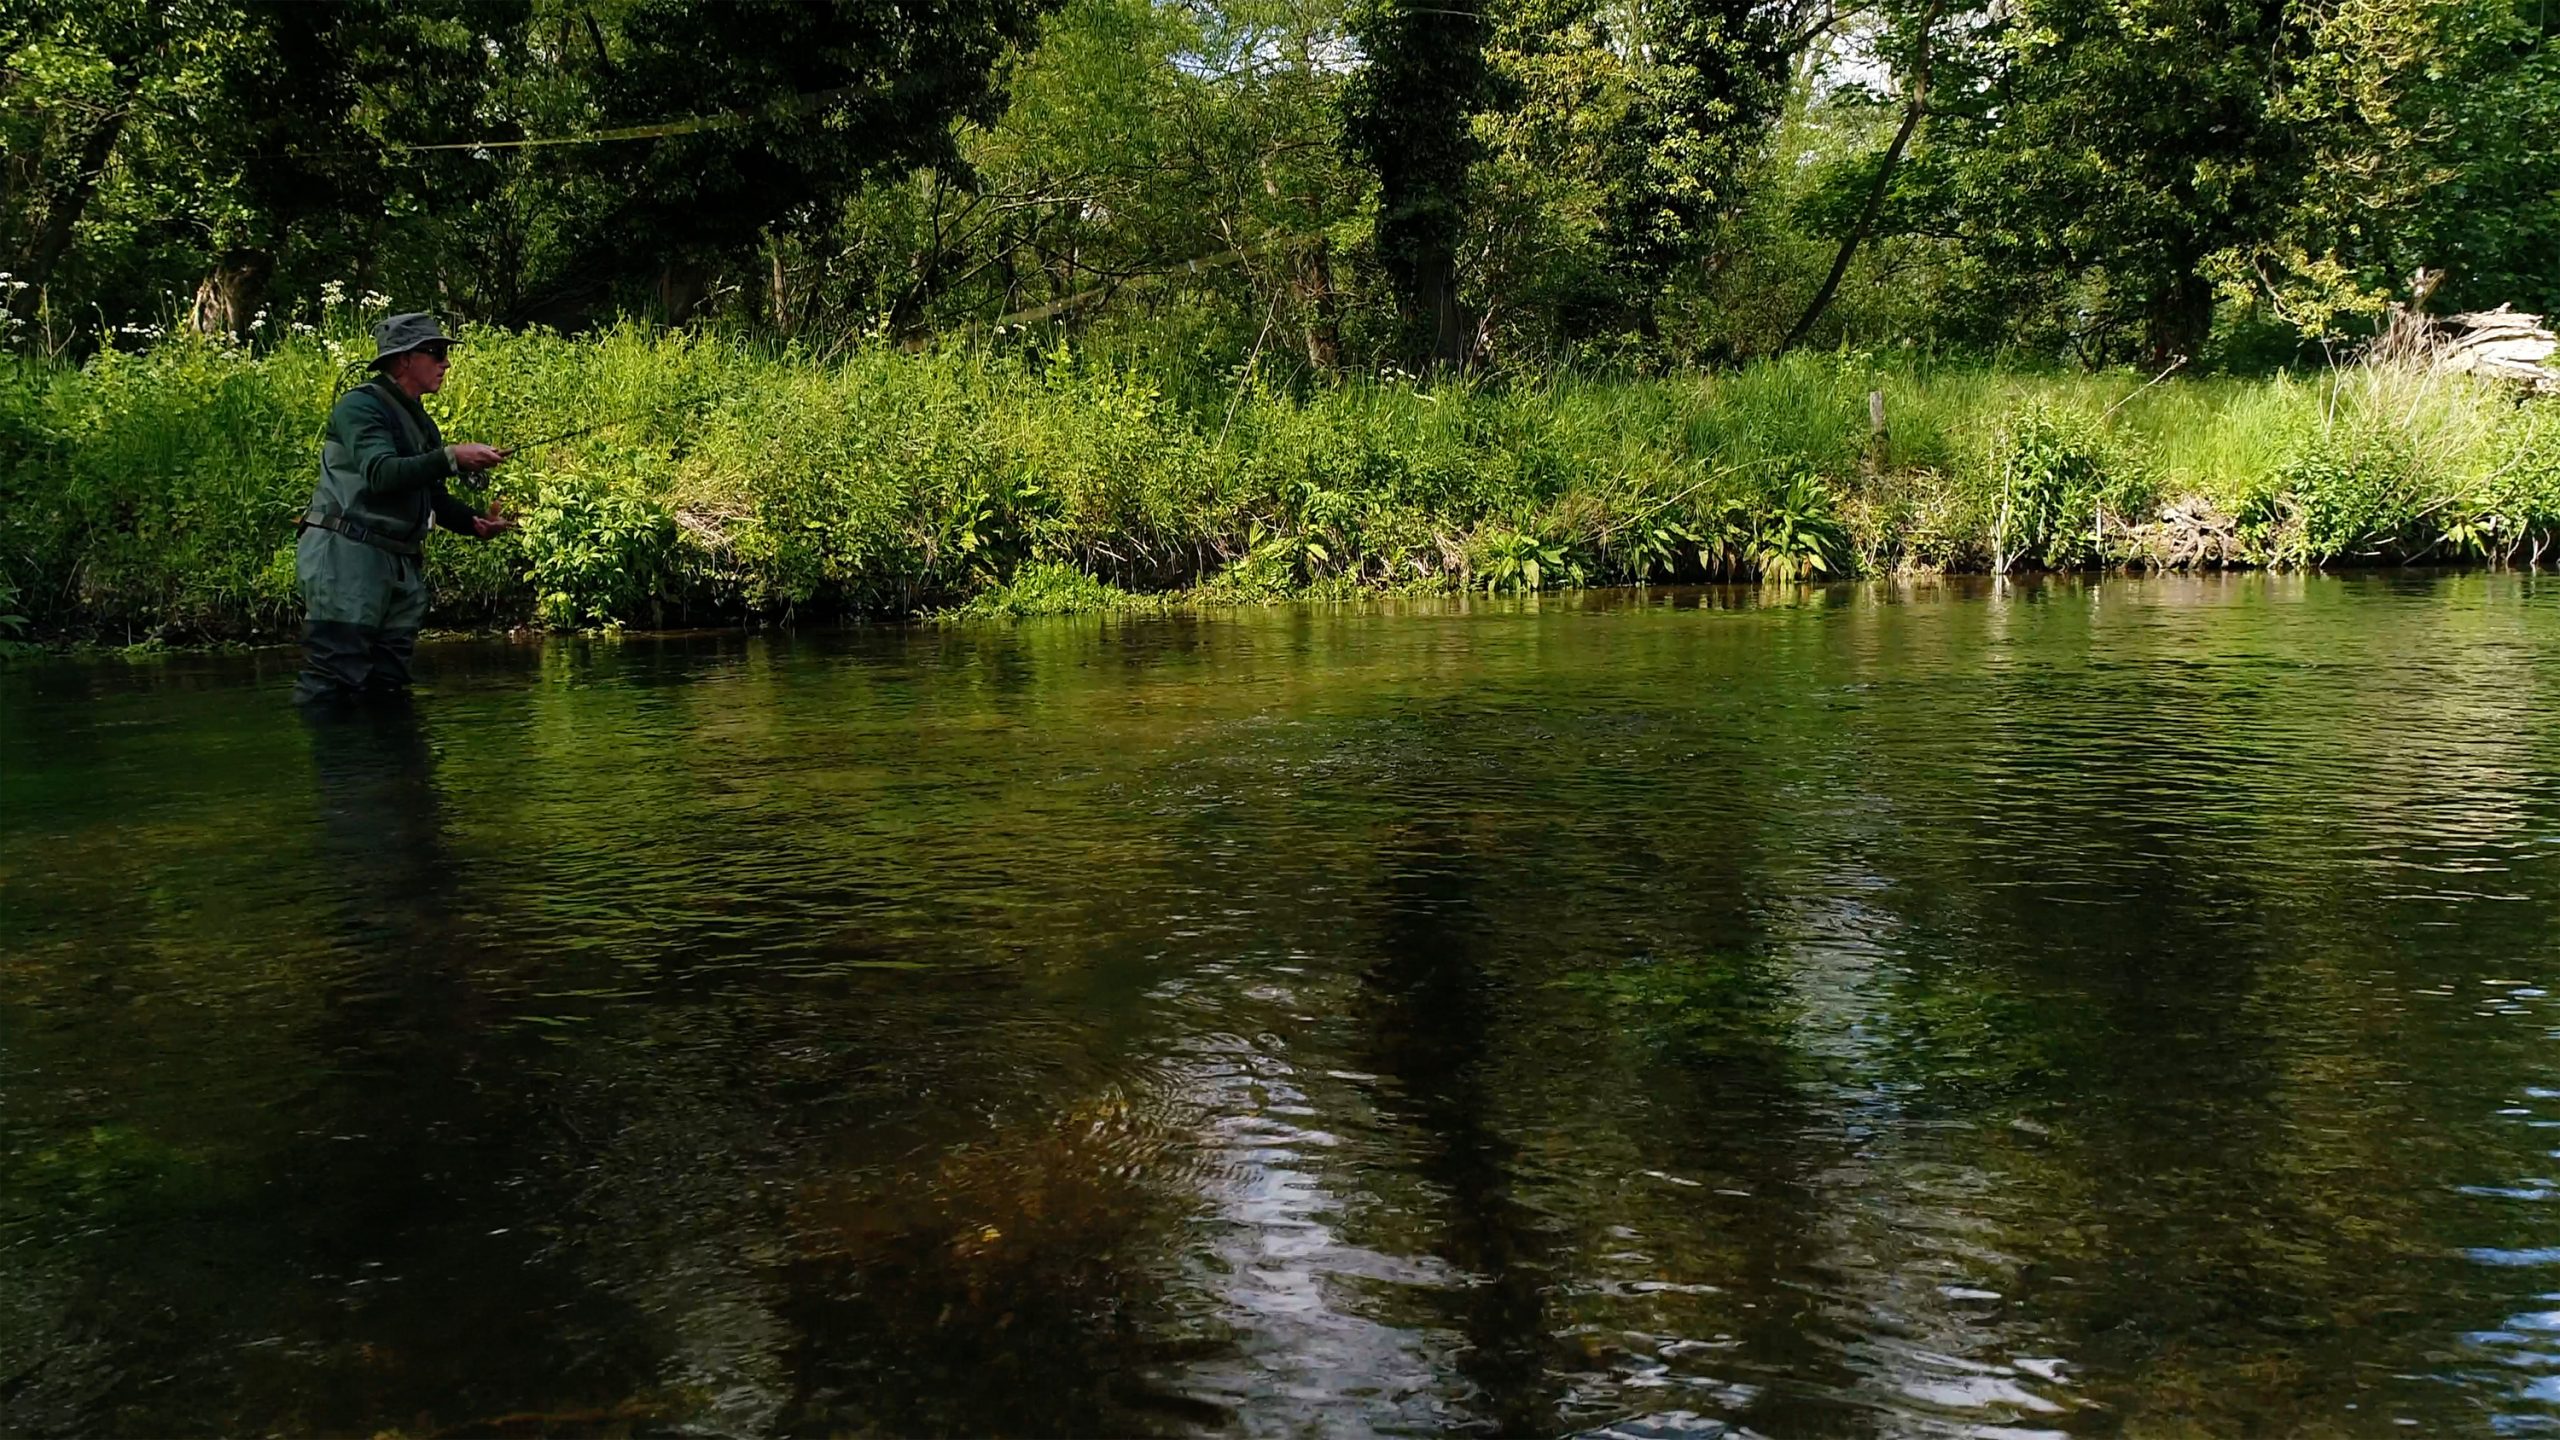 Classic dry fly fishing on a chalk stream